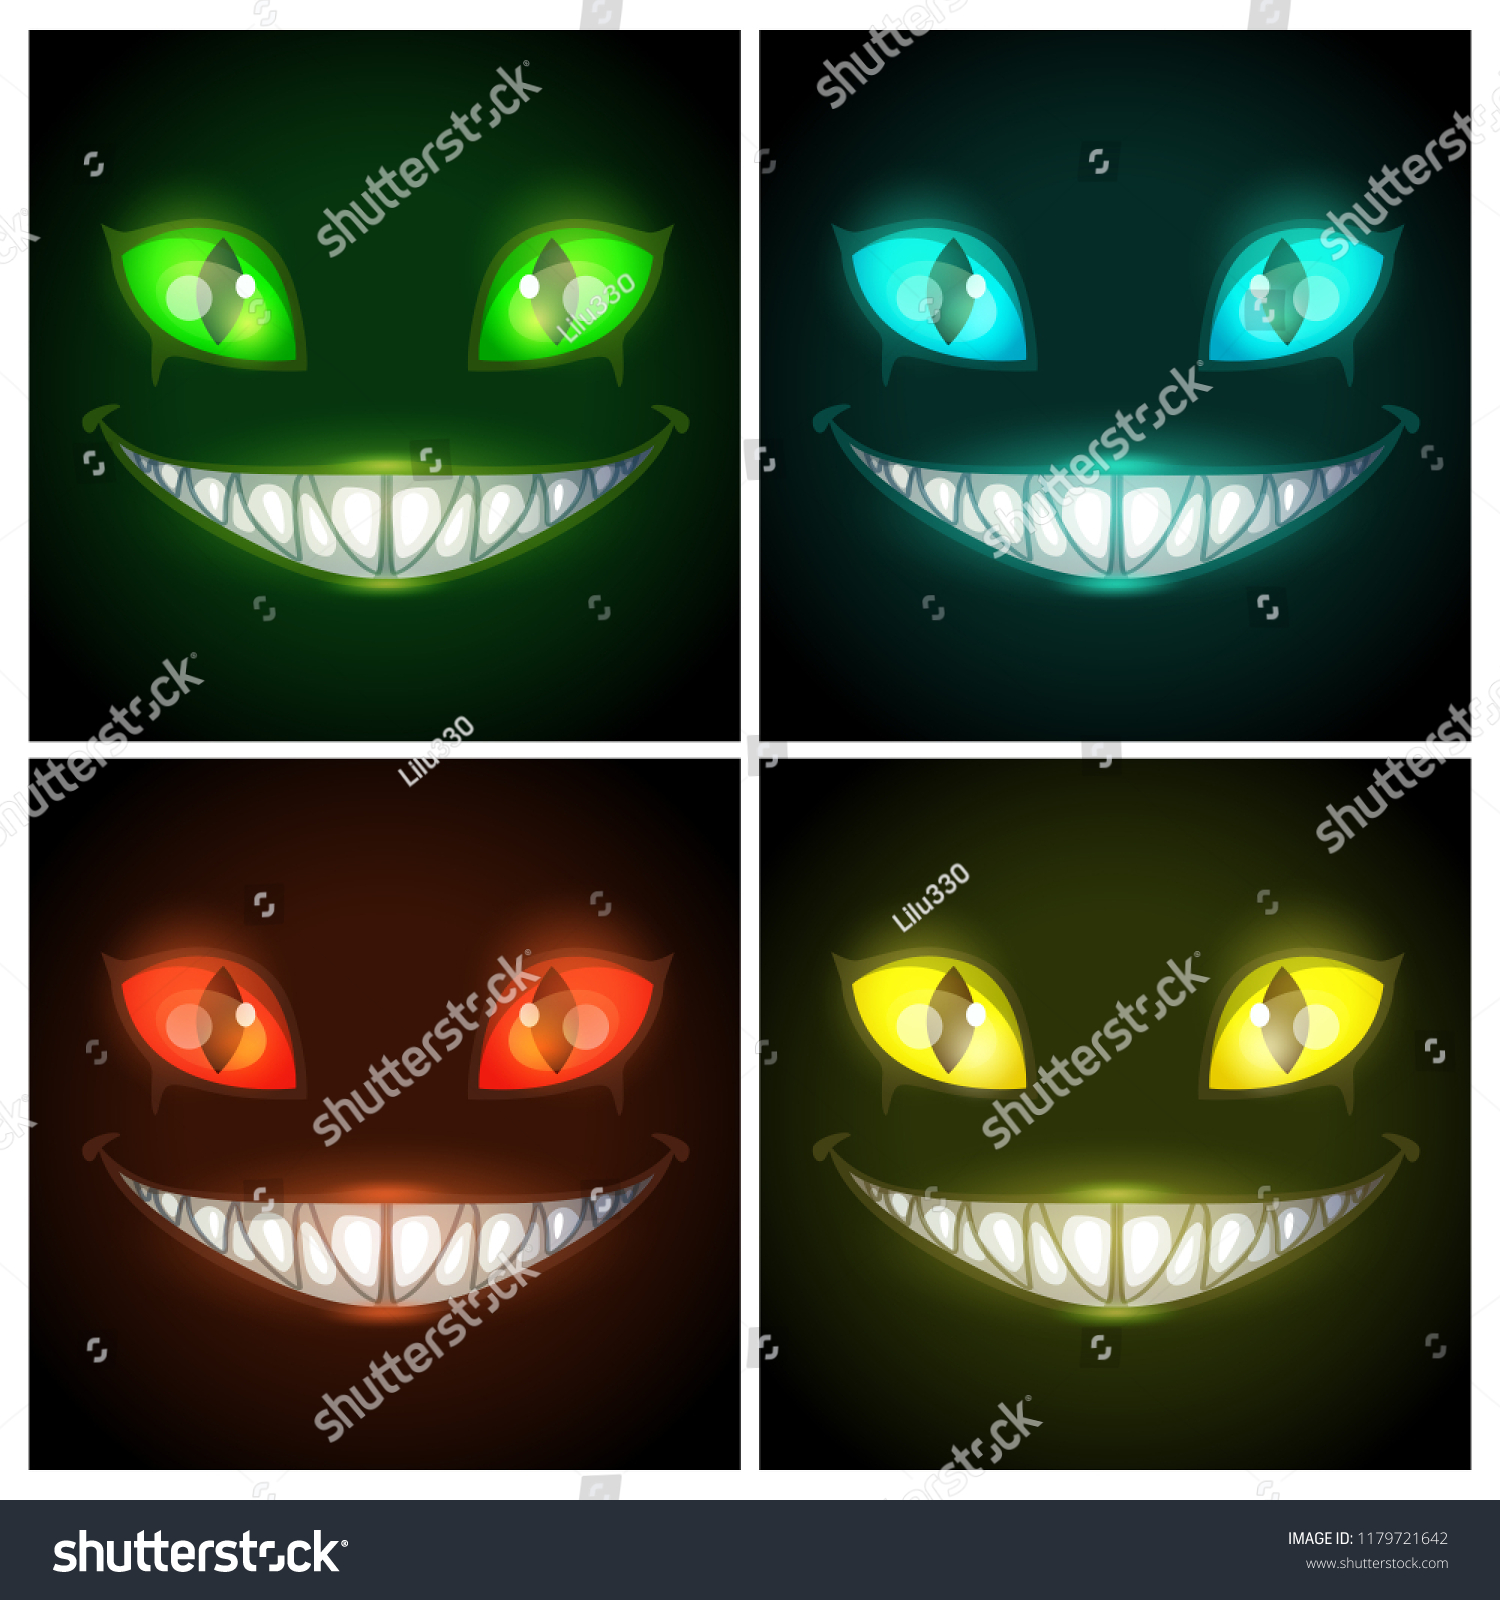 SVG of Halloween creepy posters set. Fantasy scary smiling evil animal face on the black background. Cheshire Cat eyes and mouth, vector illustration. Nightmare fantasy creature. svg